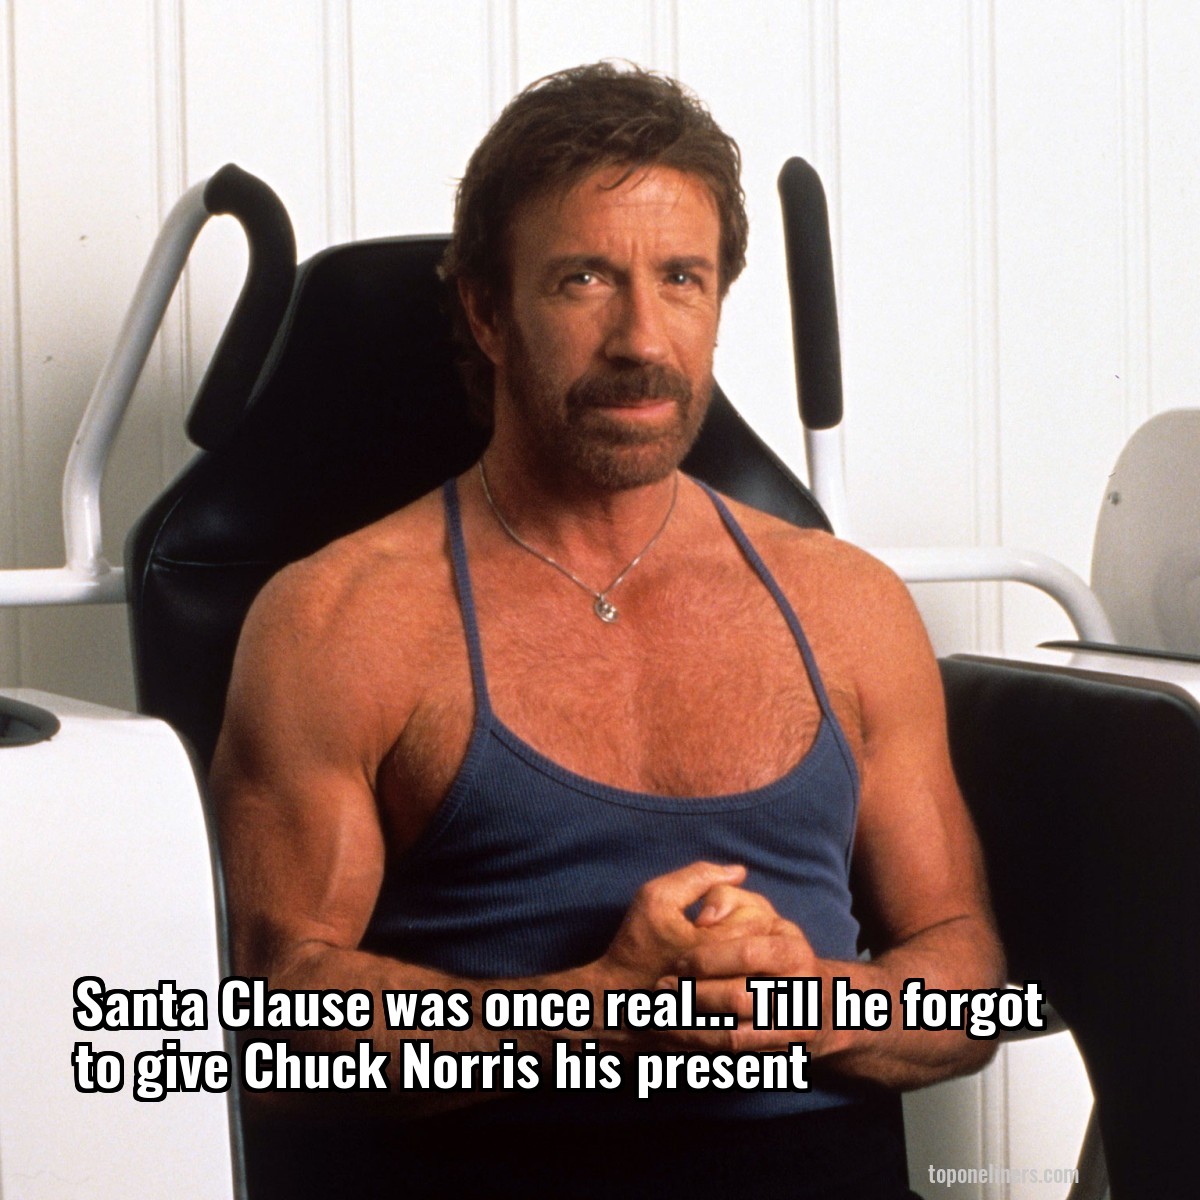 Santa Clause was once real... Till he forgot to give Chuck Norris his present